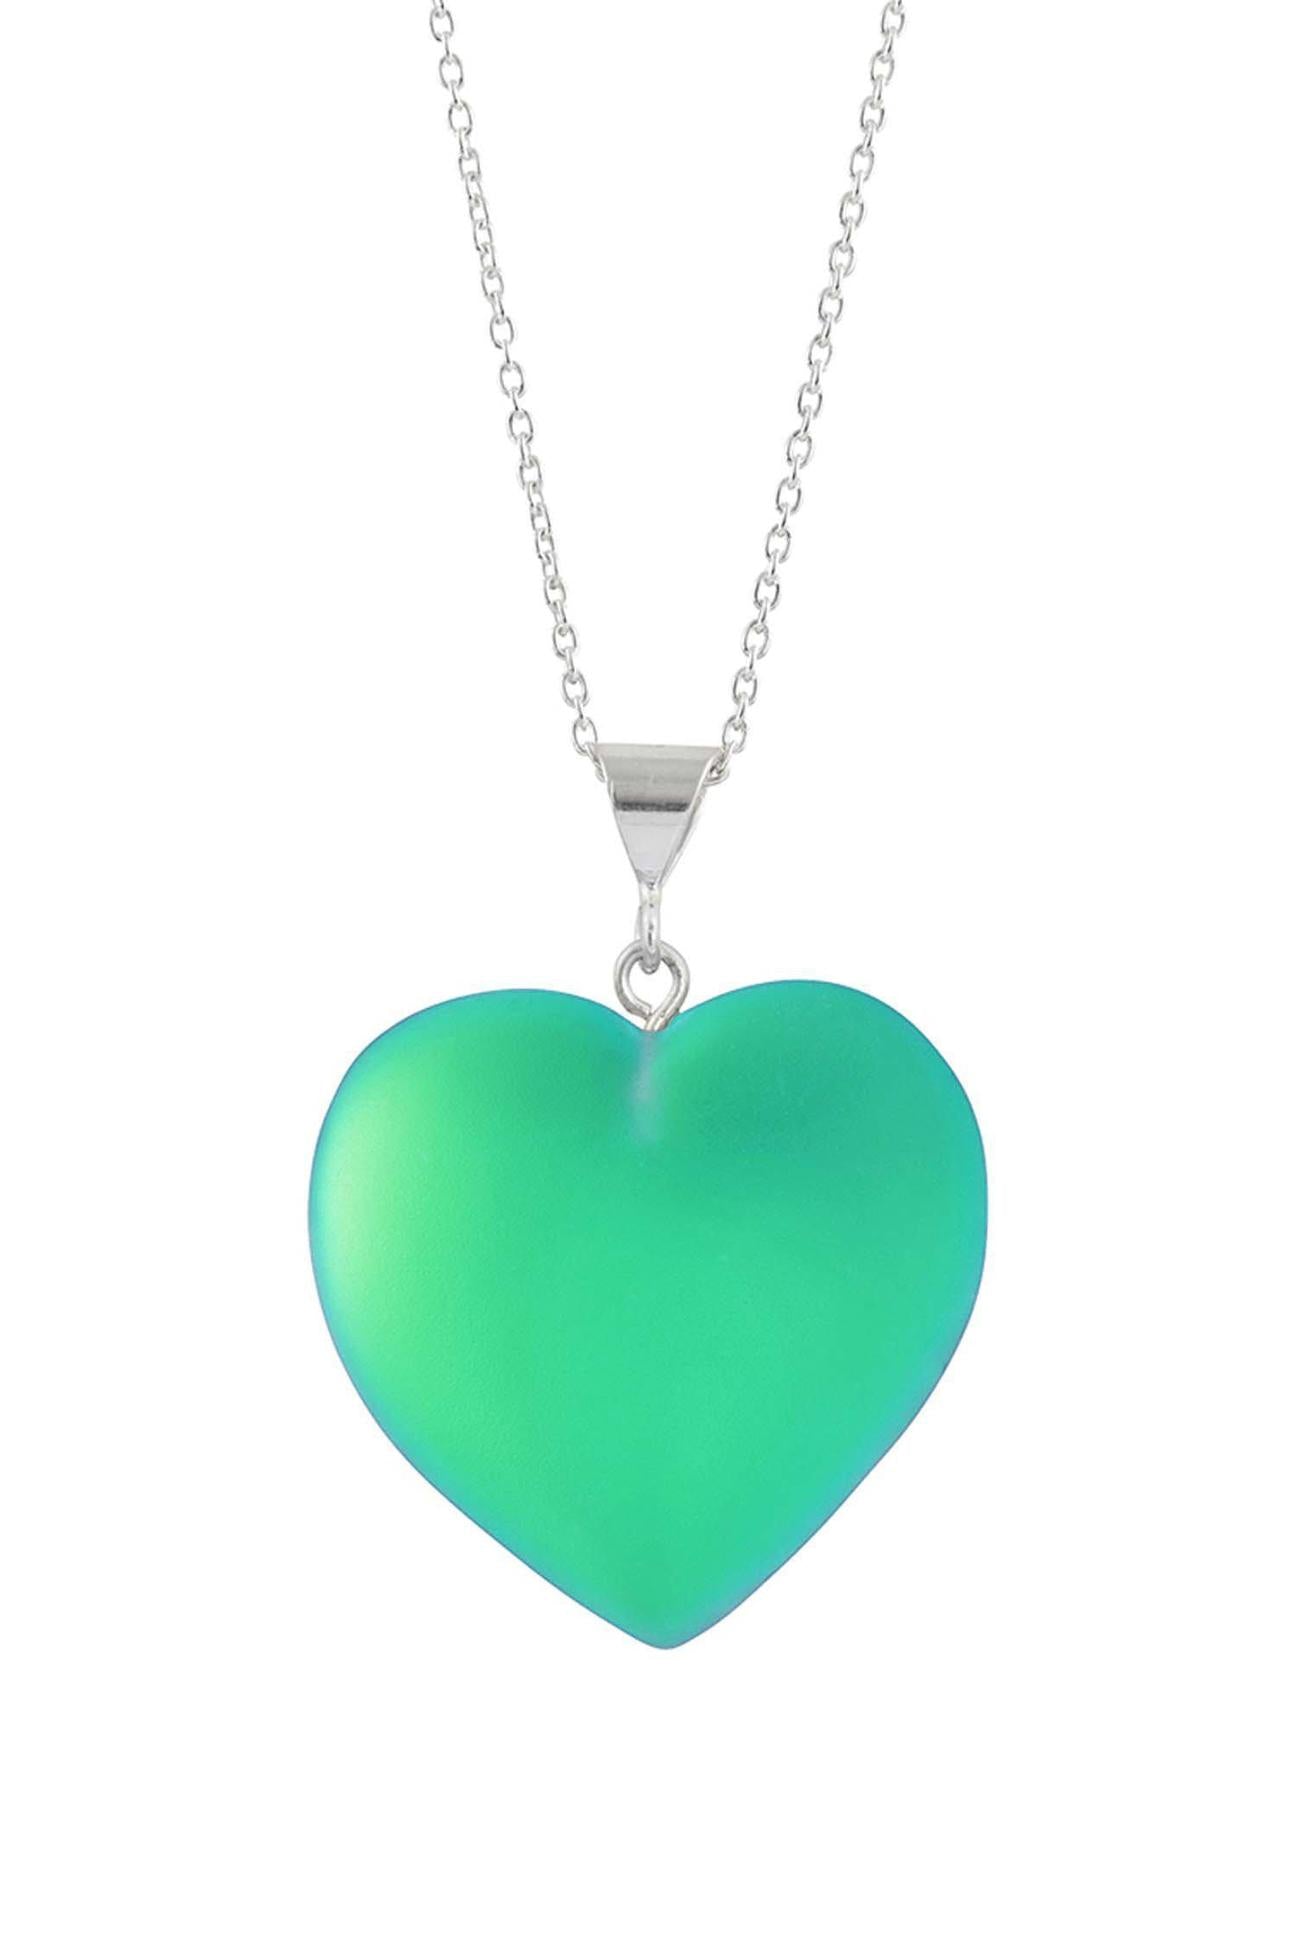 Leightworks Large Crystal Heart Pendant